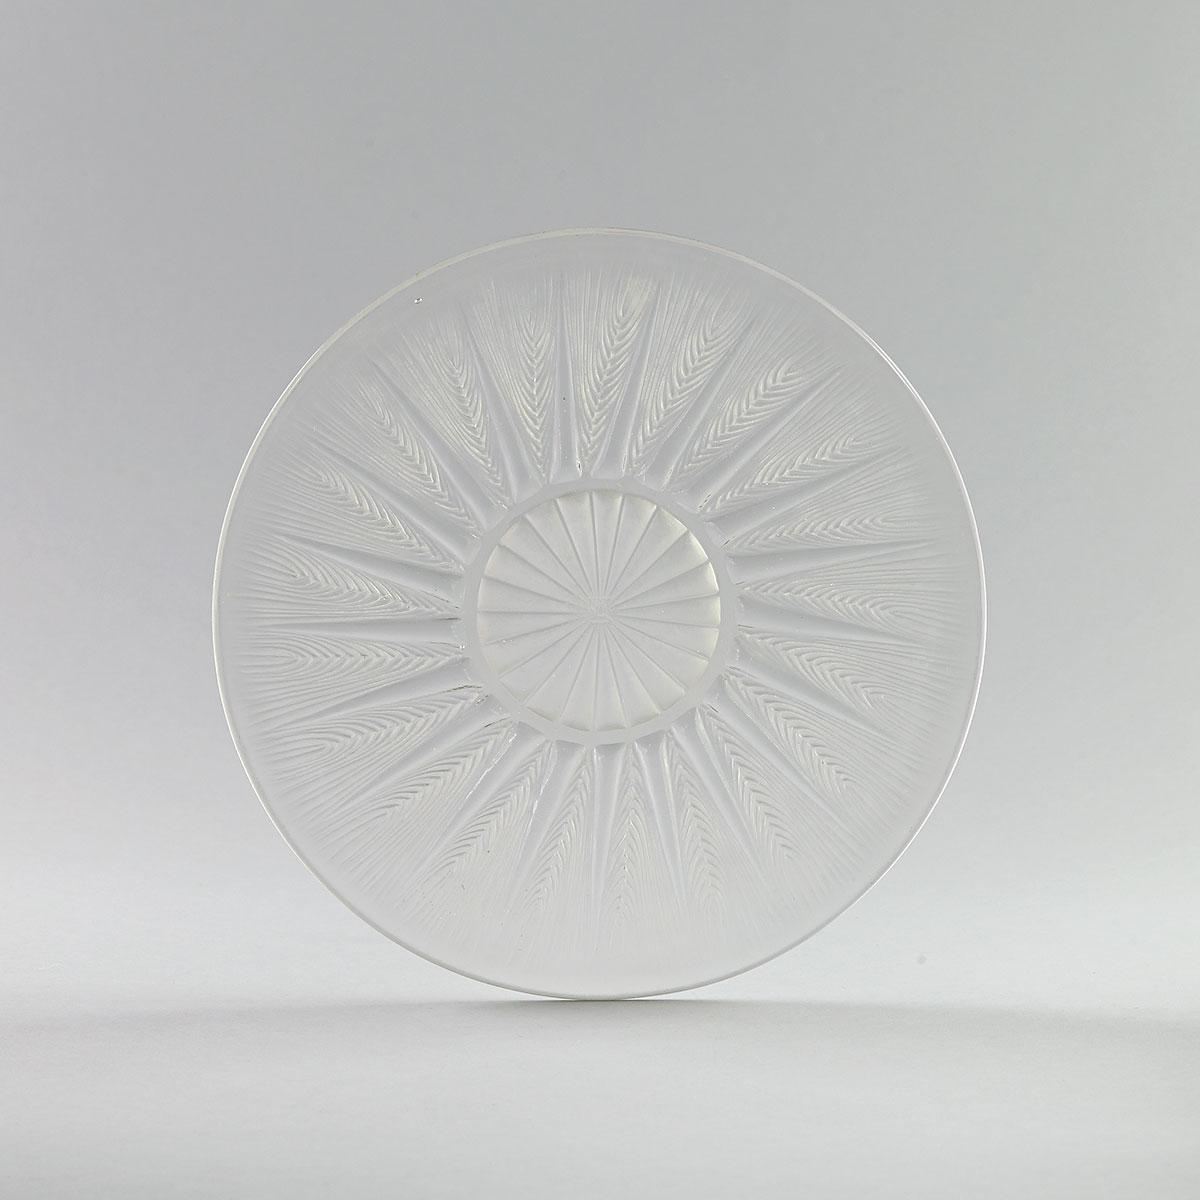 ‘Epis’, Lalique Moulded and Partly Frosted Glass Plate, c.1920